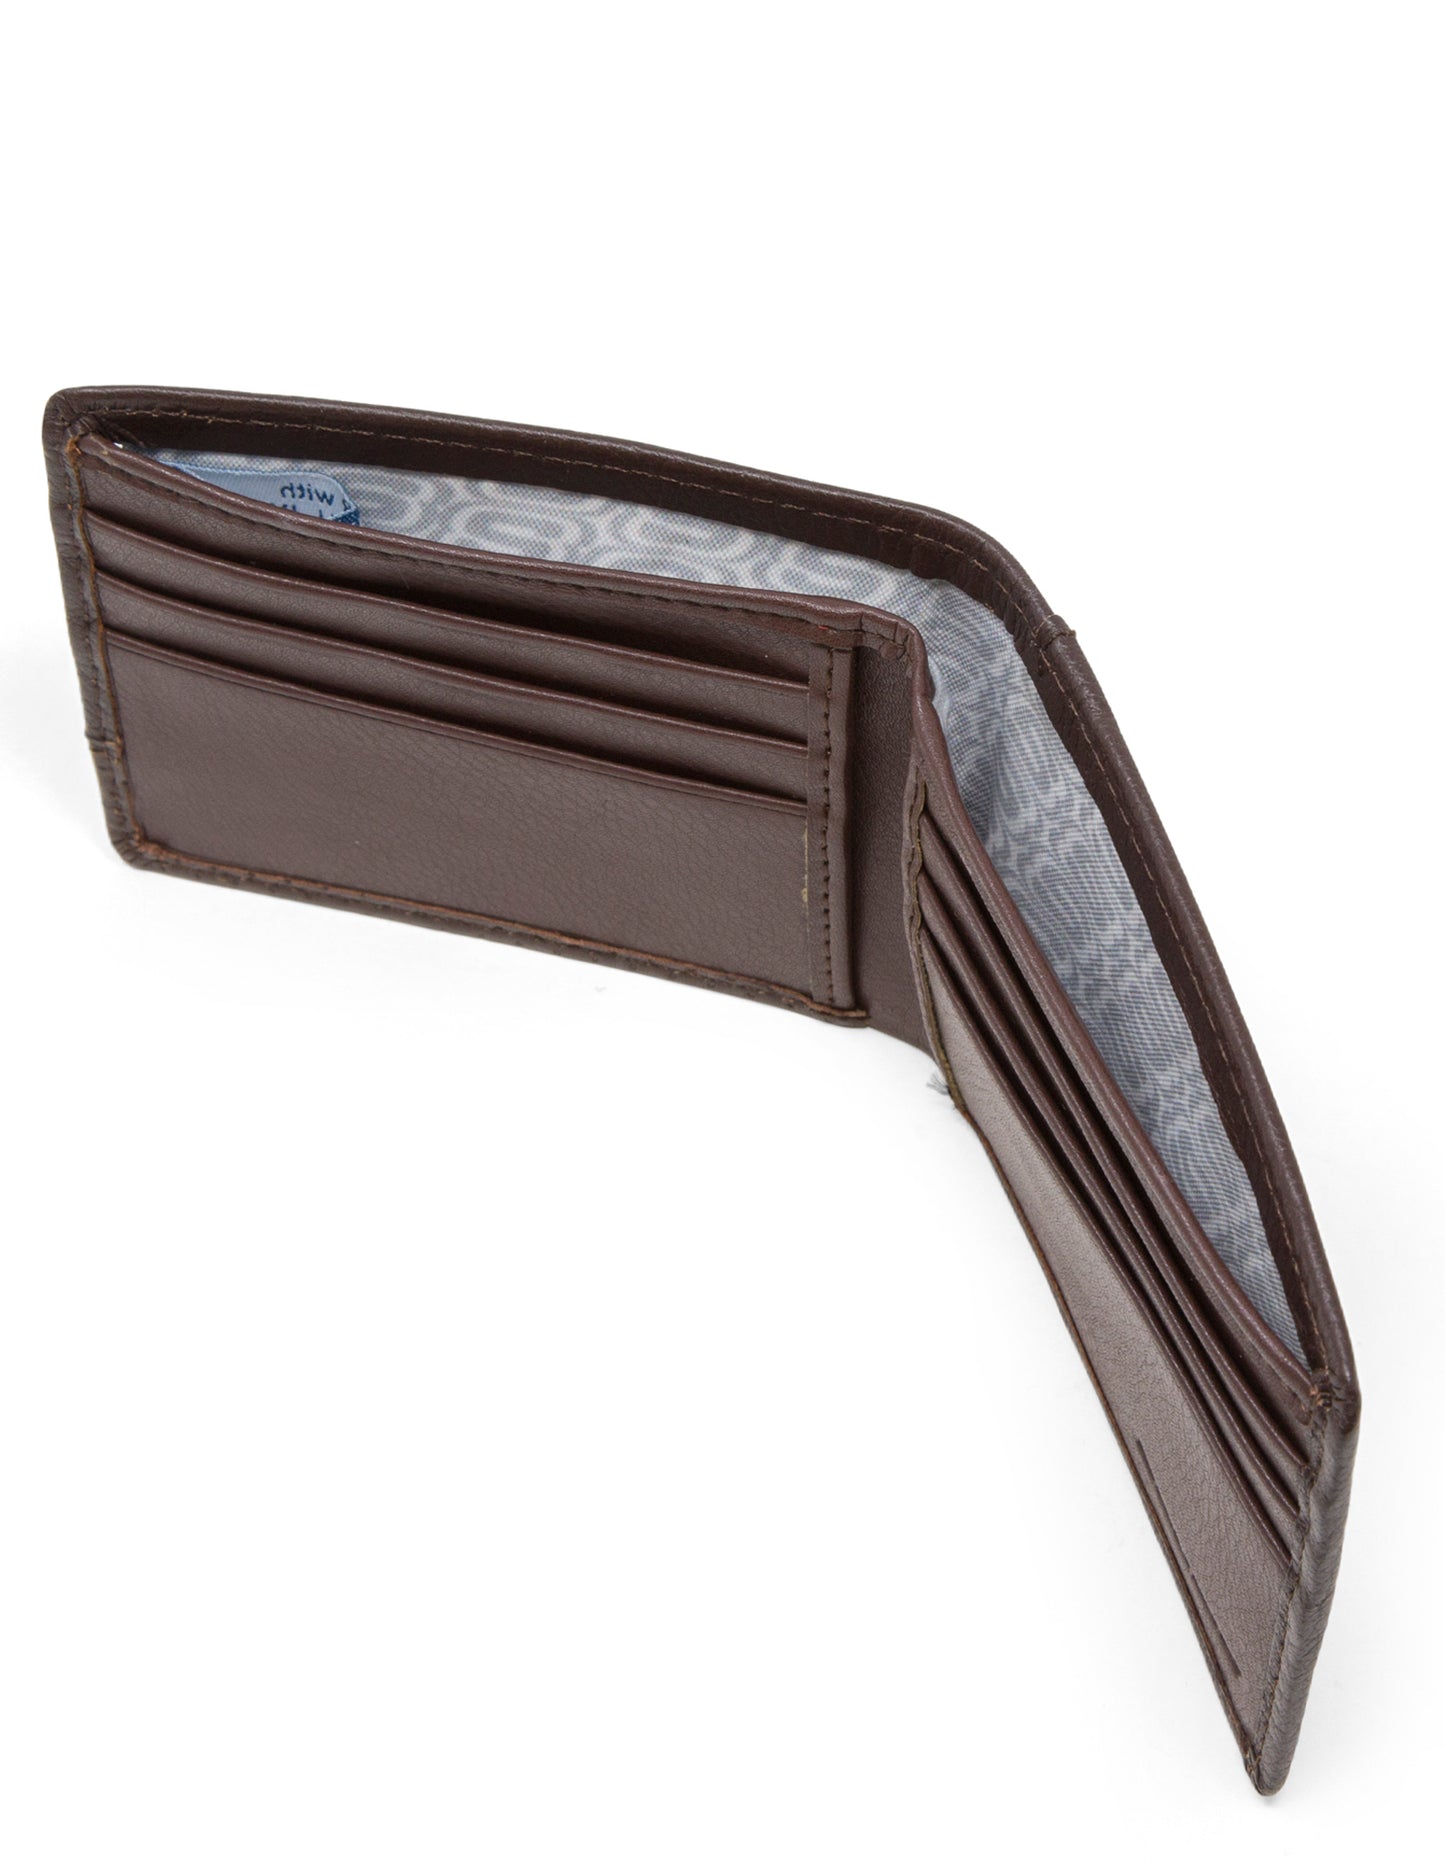 Brown wallet 6 card slots, 2 slip pockets and one cash compartment